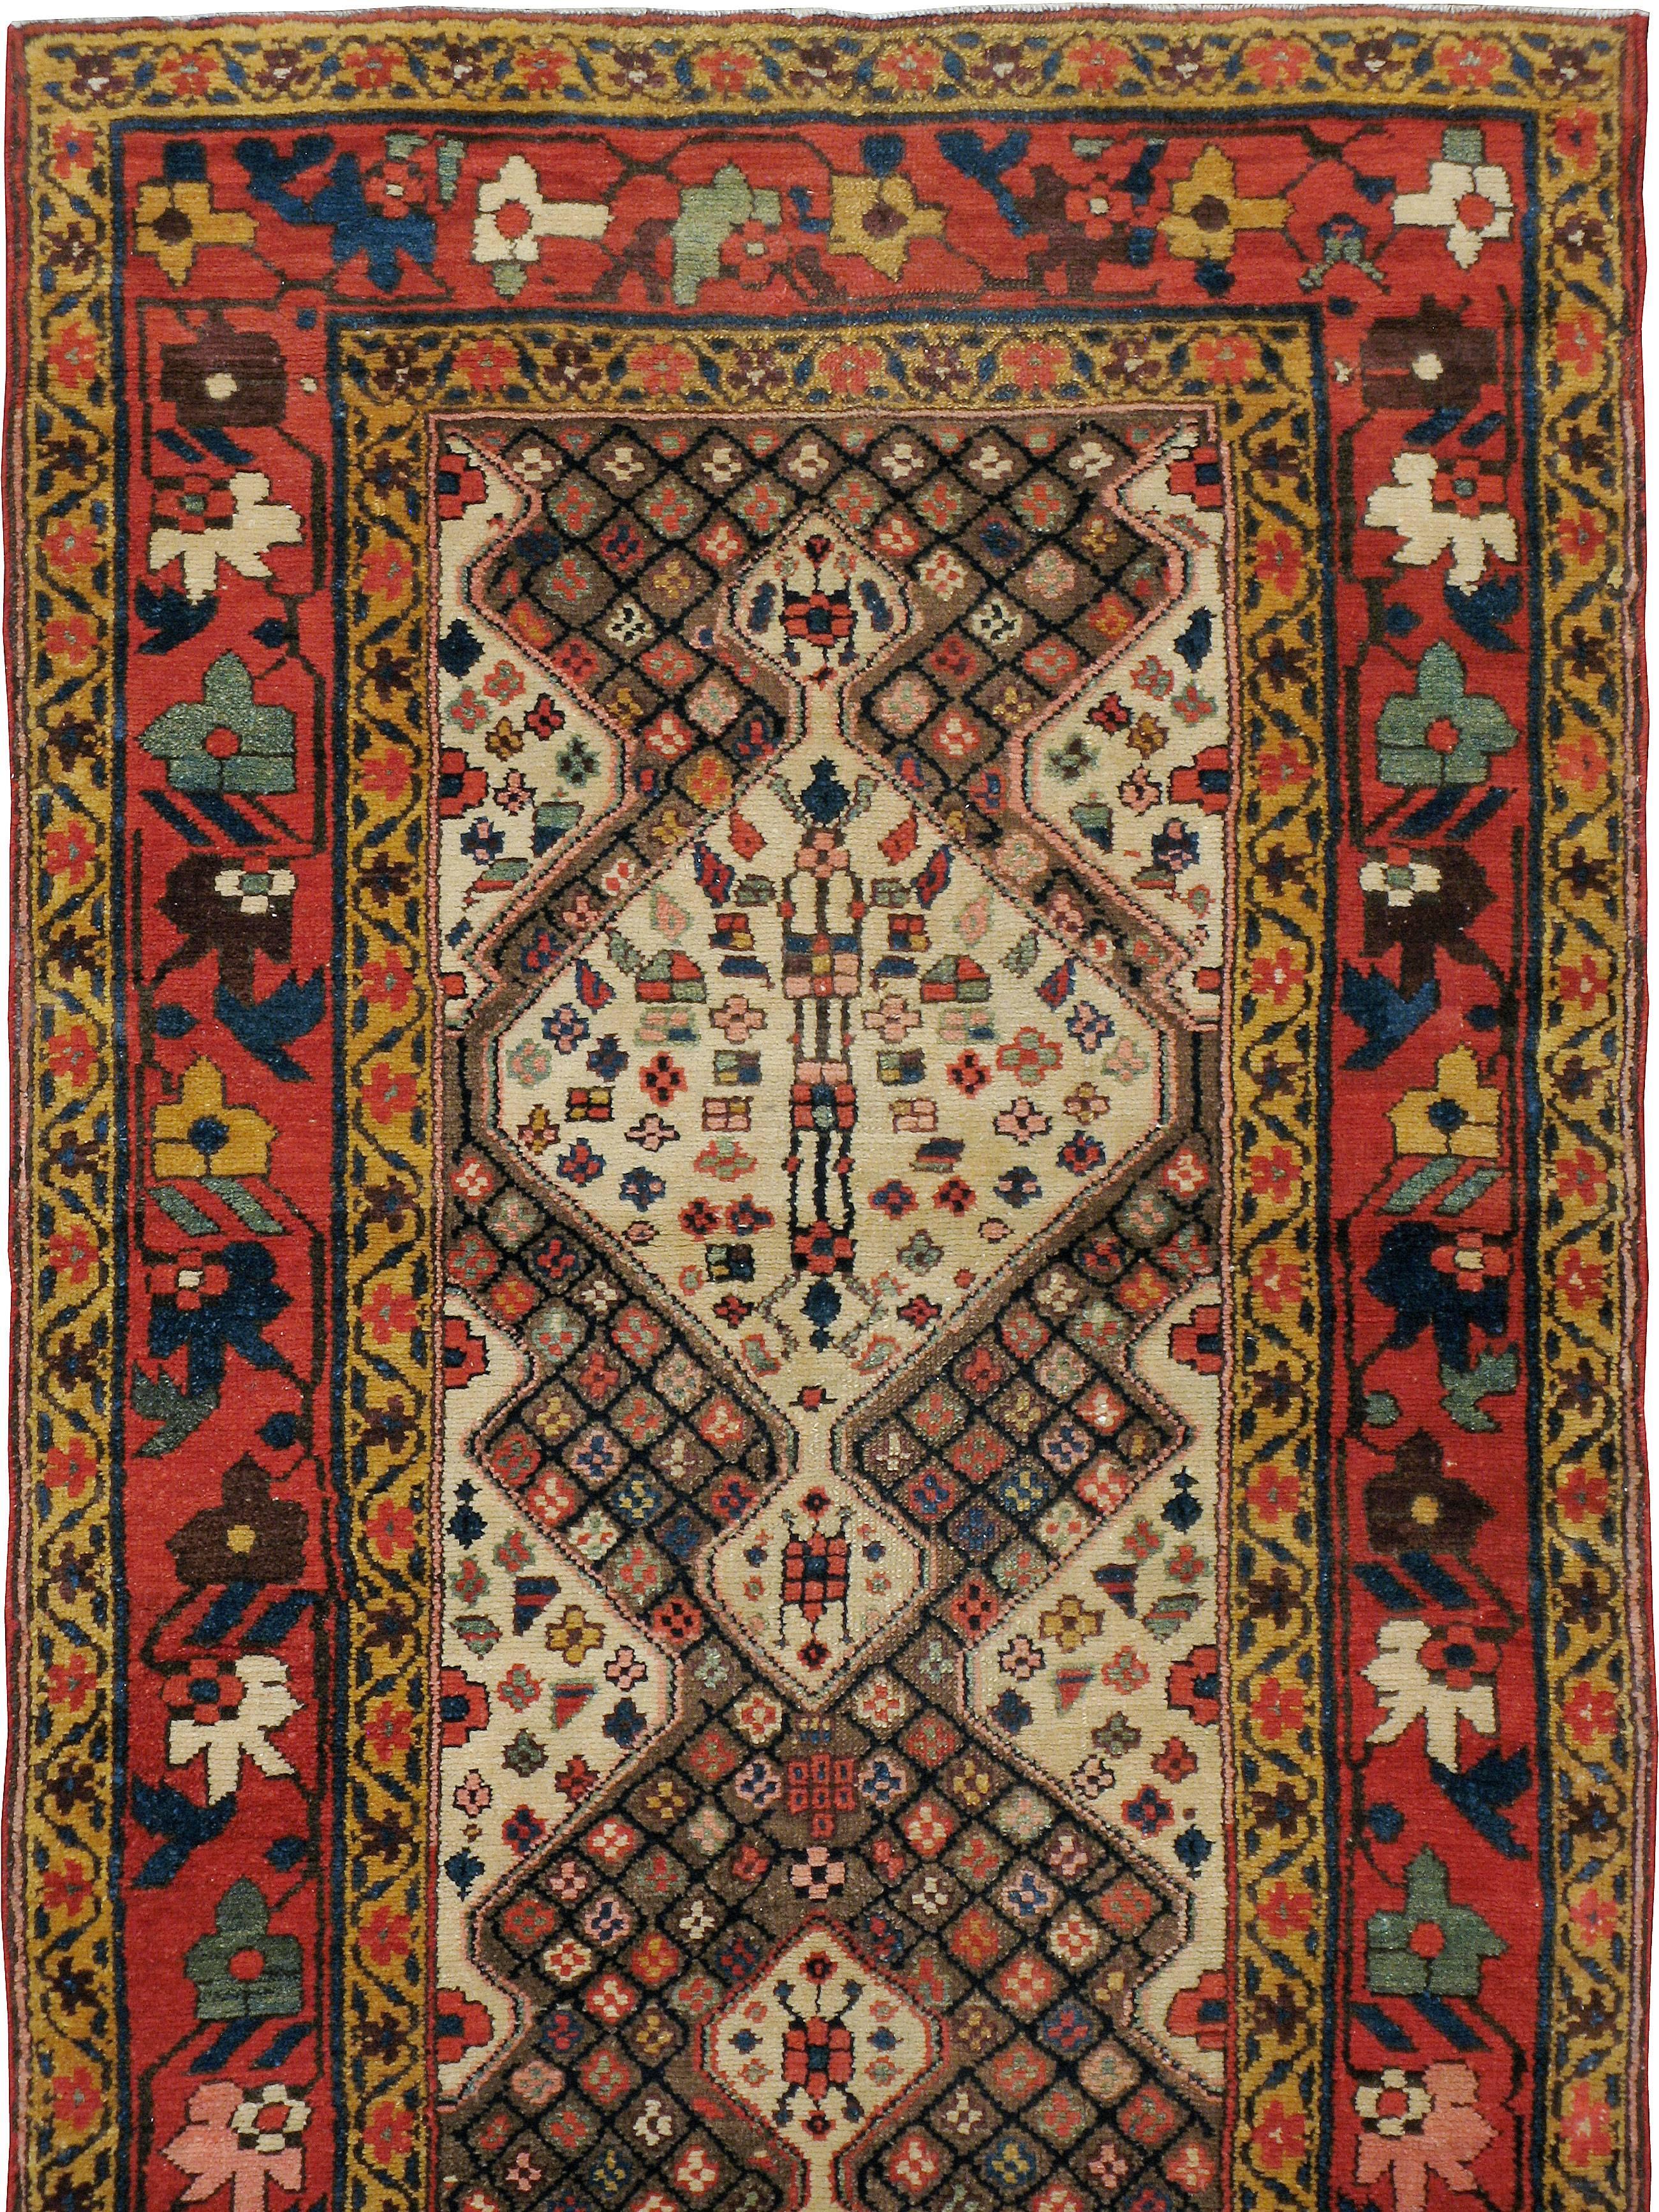 An antique Persian North West rug from the first quarter of the 20th century.